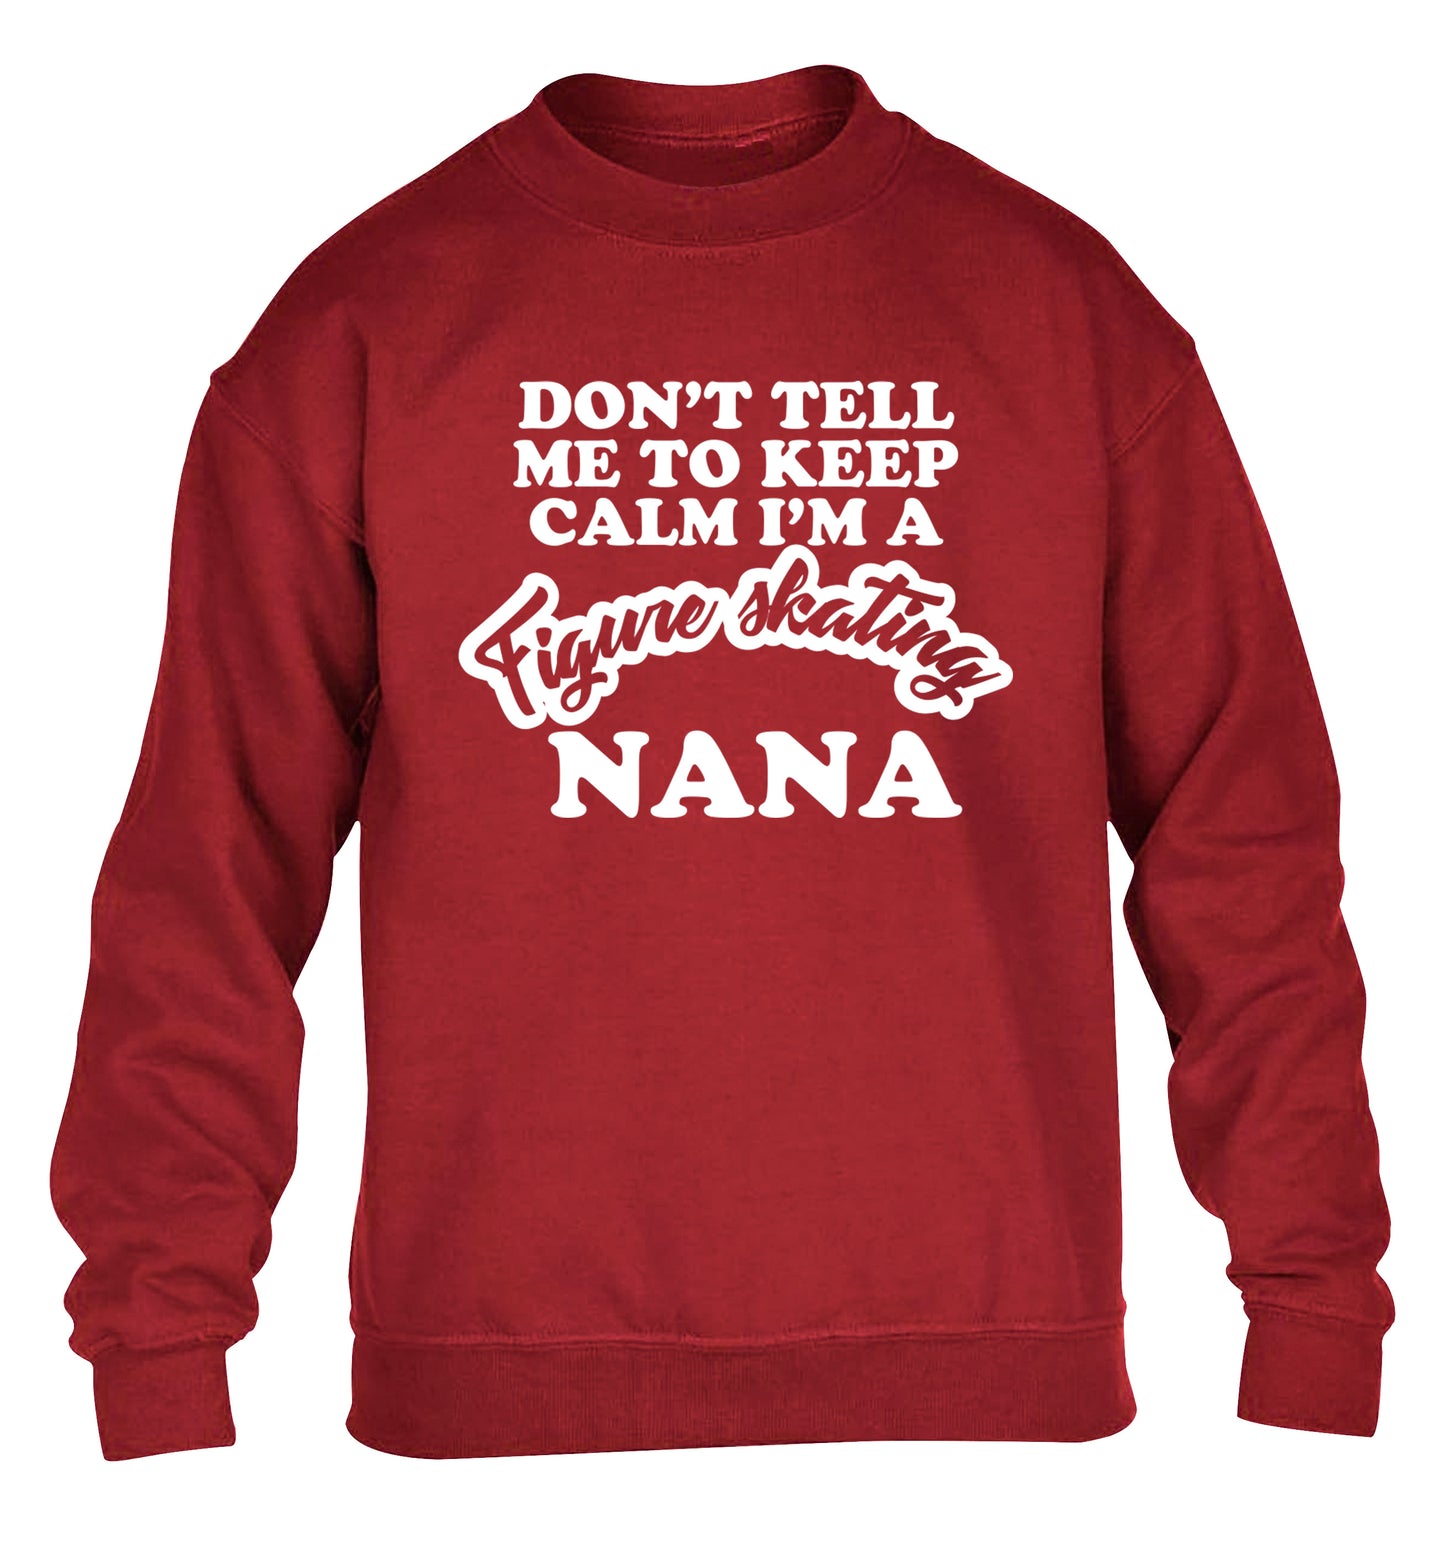 Don't tell me to keep calm I'm a figure skating nana children's grey sweater 12-14 Years